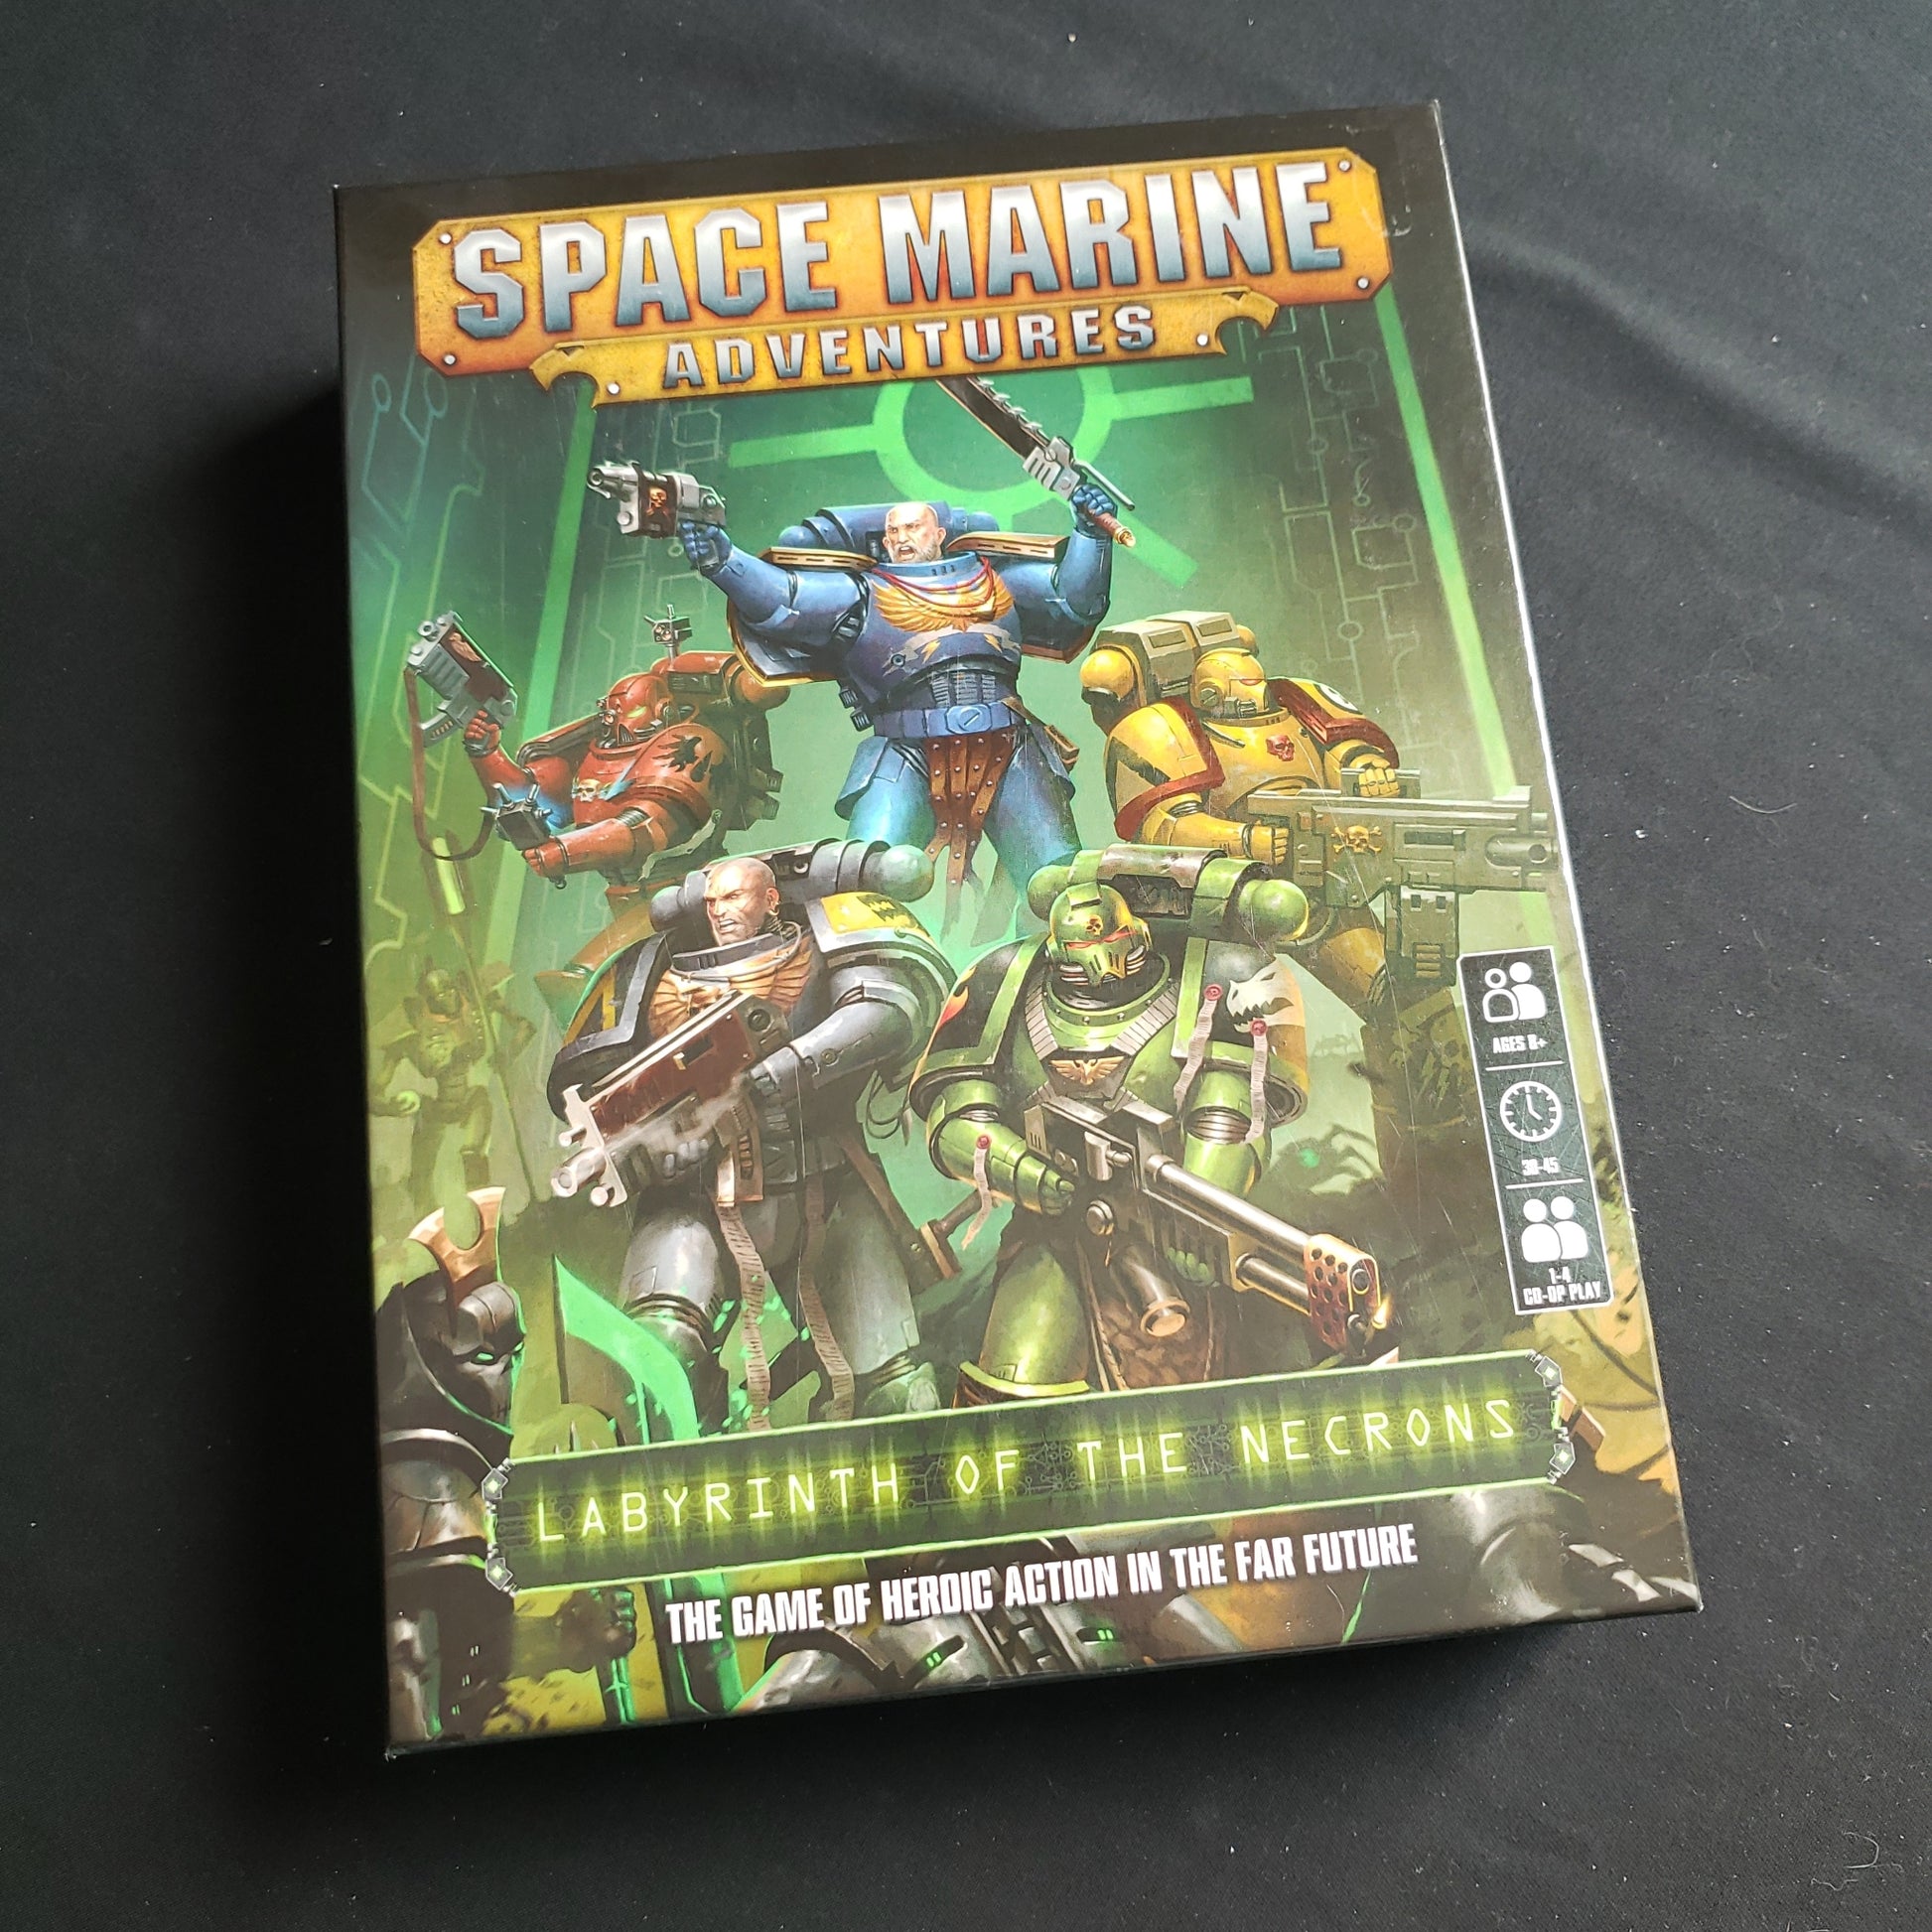 Warhammer 40,000 Space Marine The Board Game is a board game based